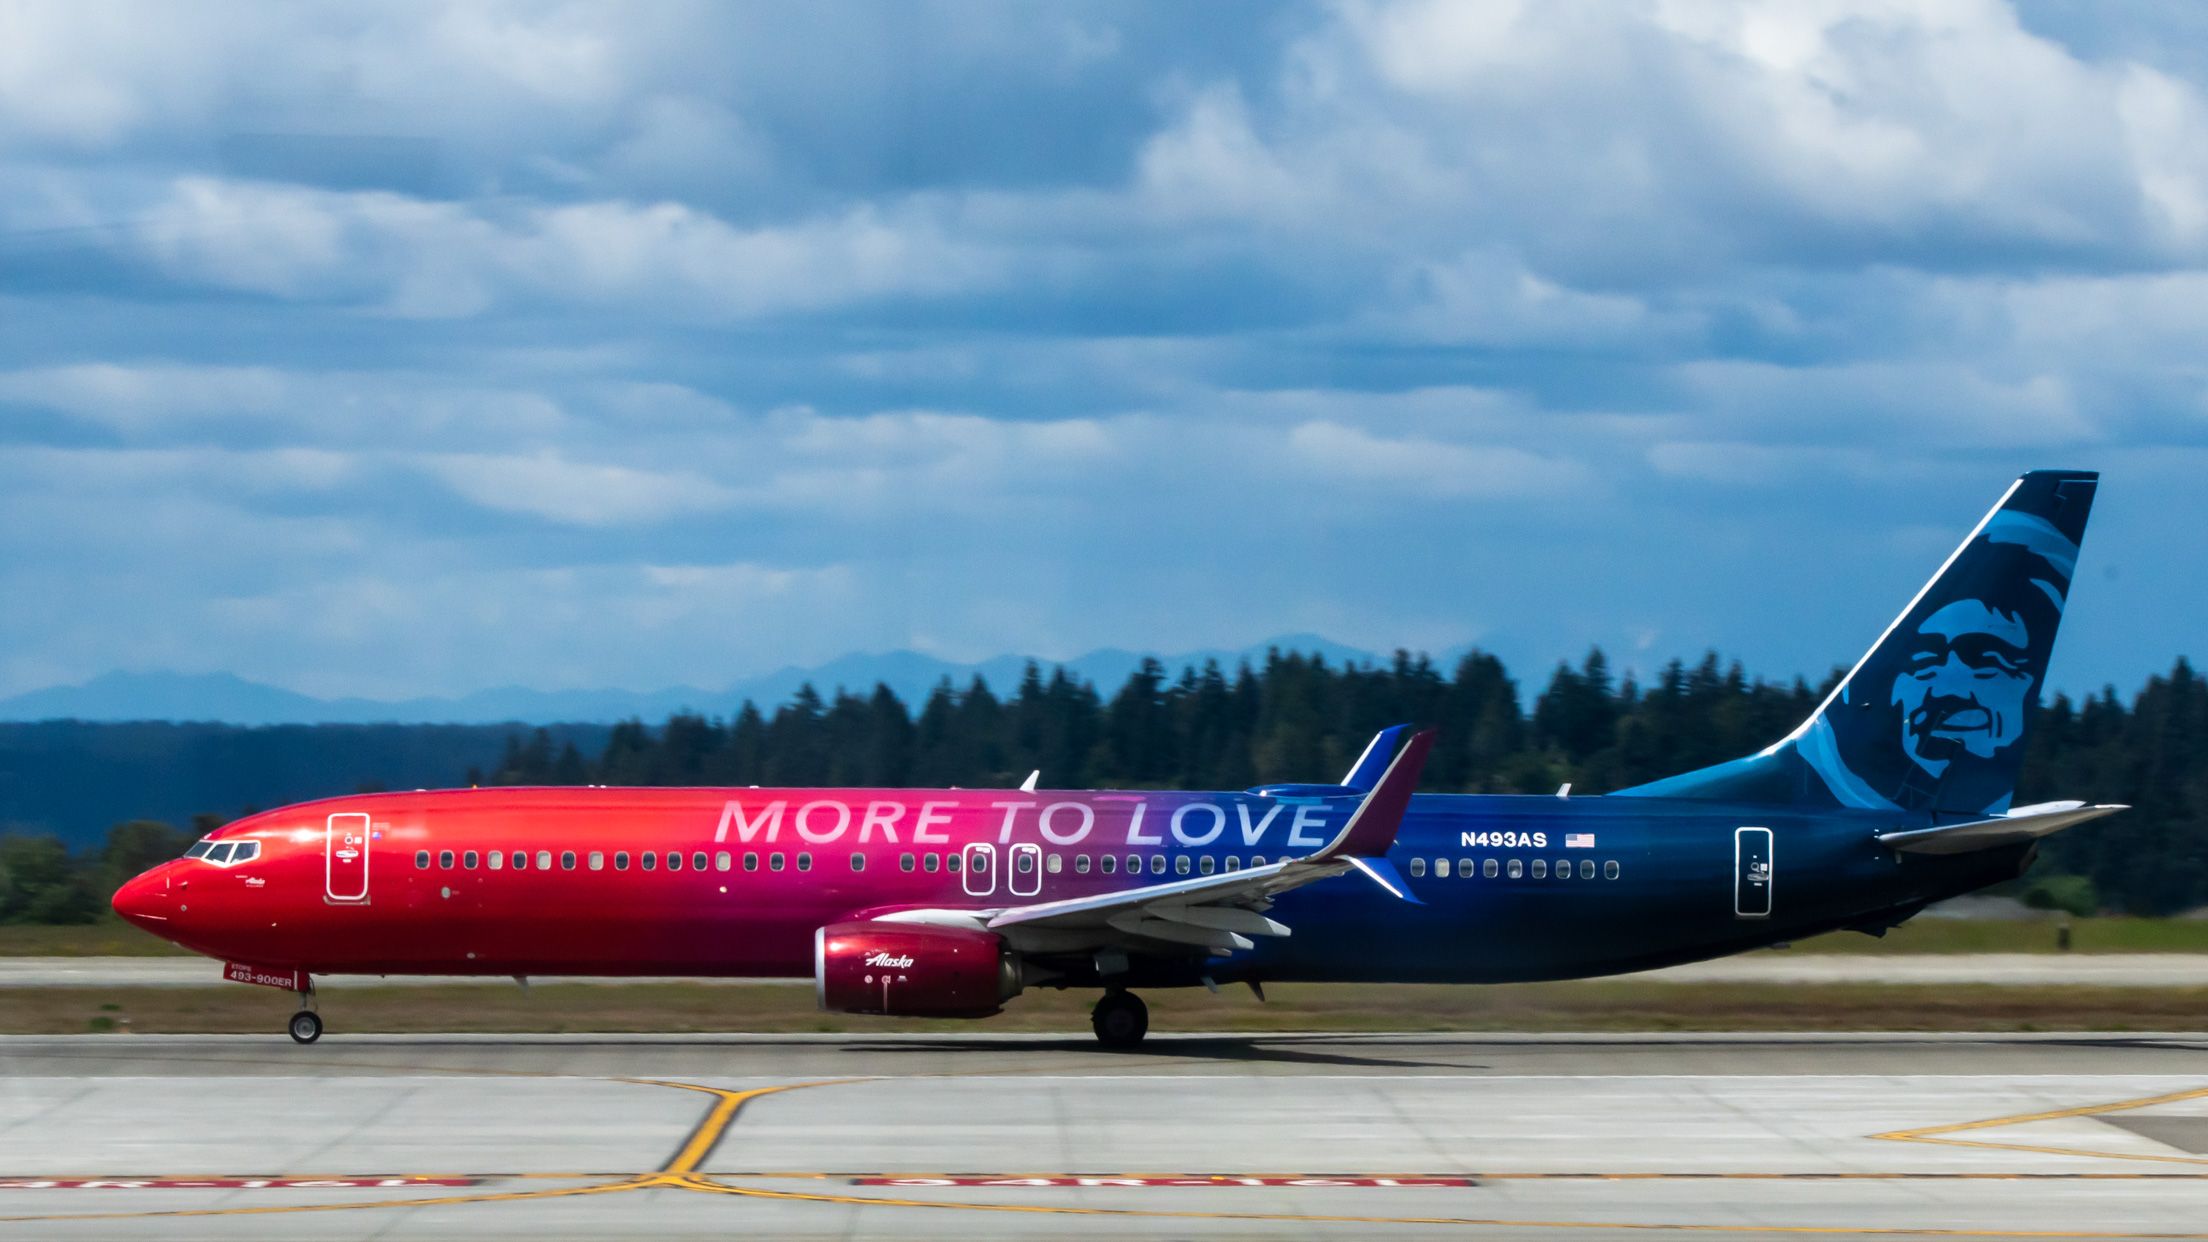 "More to Love" Heading Down the KSEA Runway - Alaska Airlines livery on a 737-900ER celebrating acquiring Virgin America